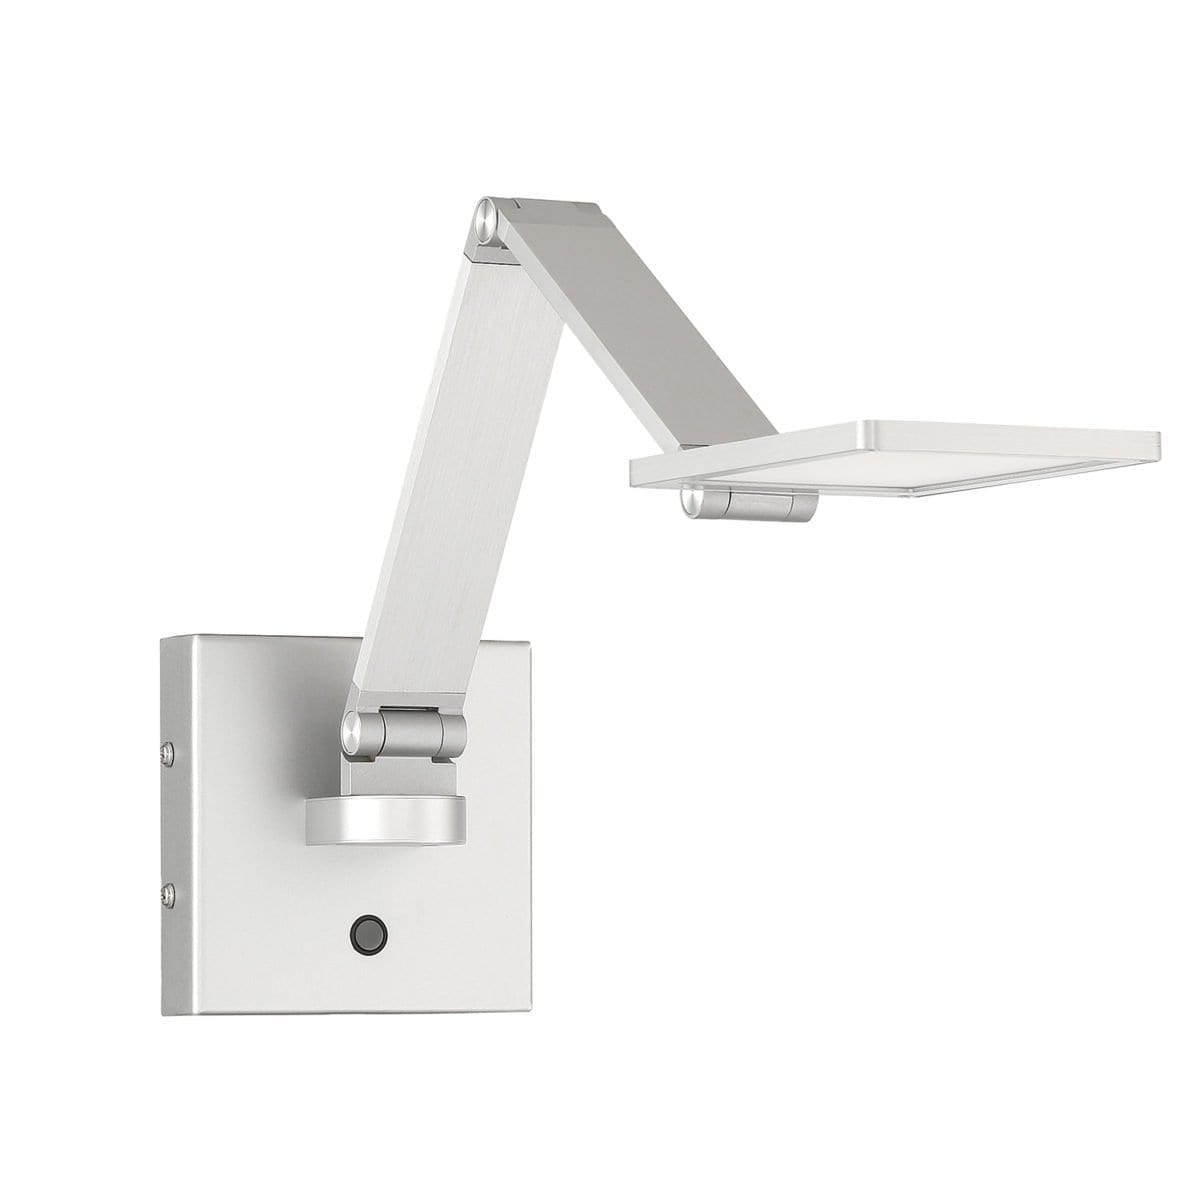 148 SA100 AL
LED Wall Swing Arm
Available in Aluminum or Black
Regular Price $381.99
Sale Price $267.99